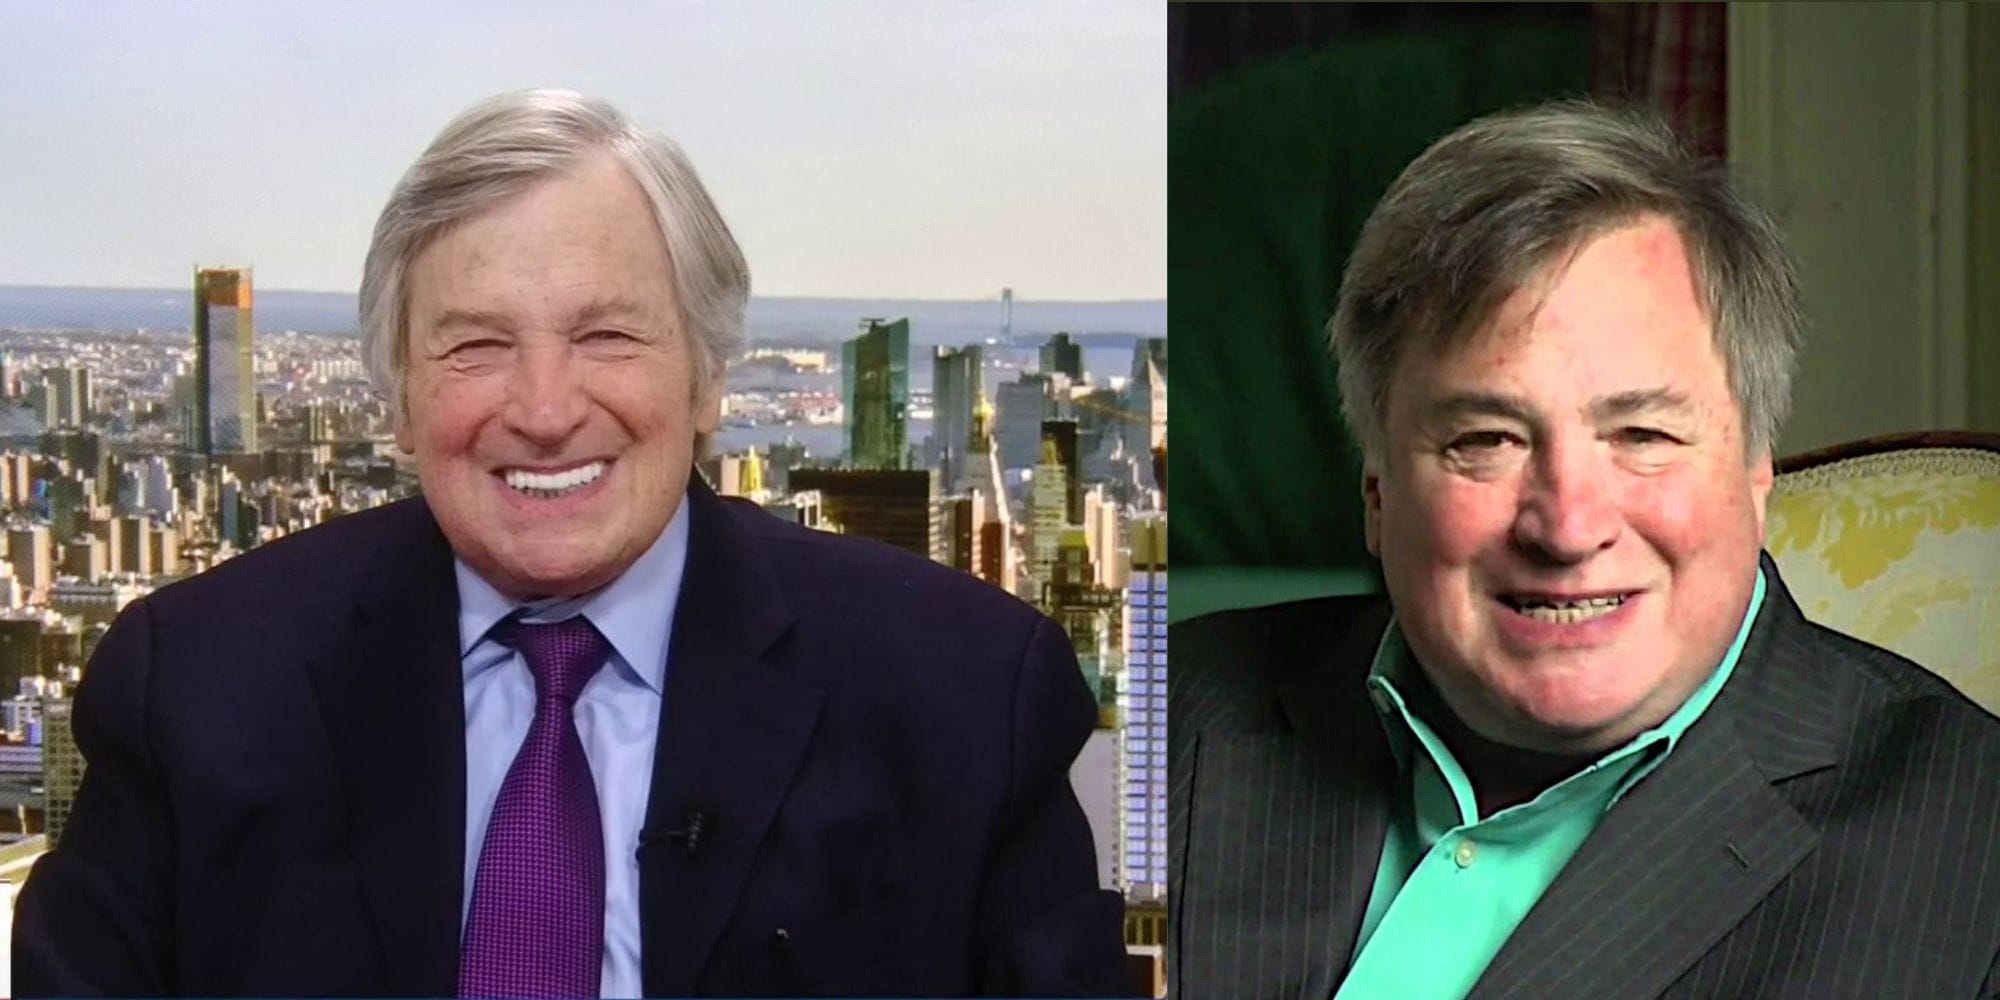 Dick Morris Partner: Is He Still Married to Eileen McGann? Answered